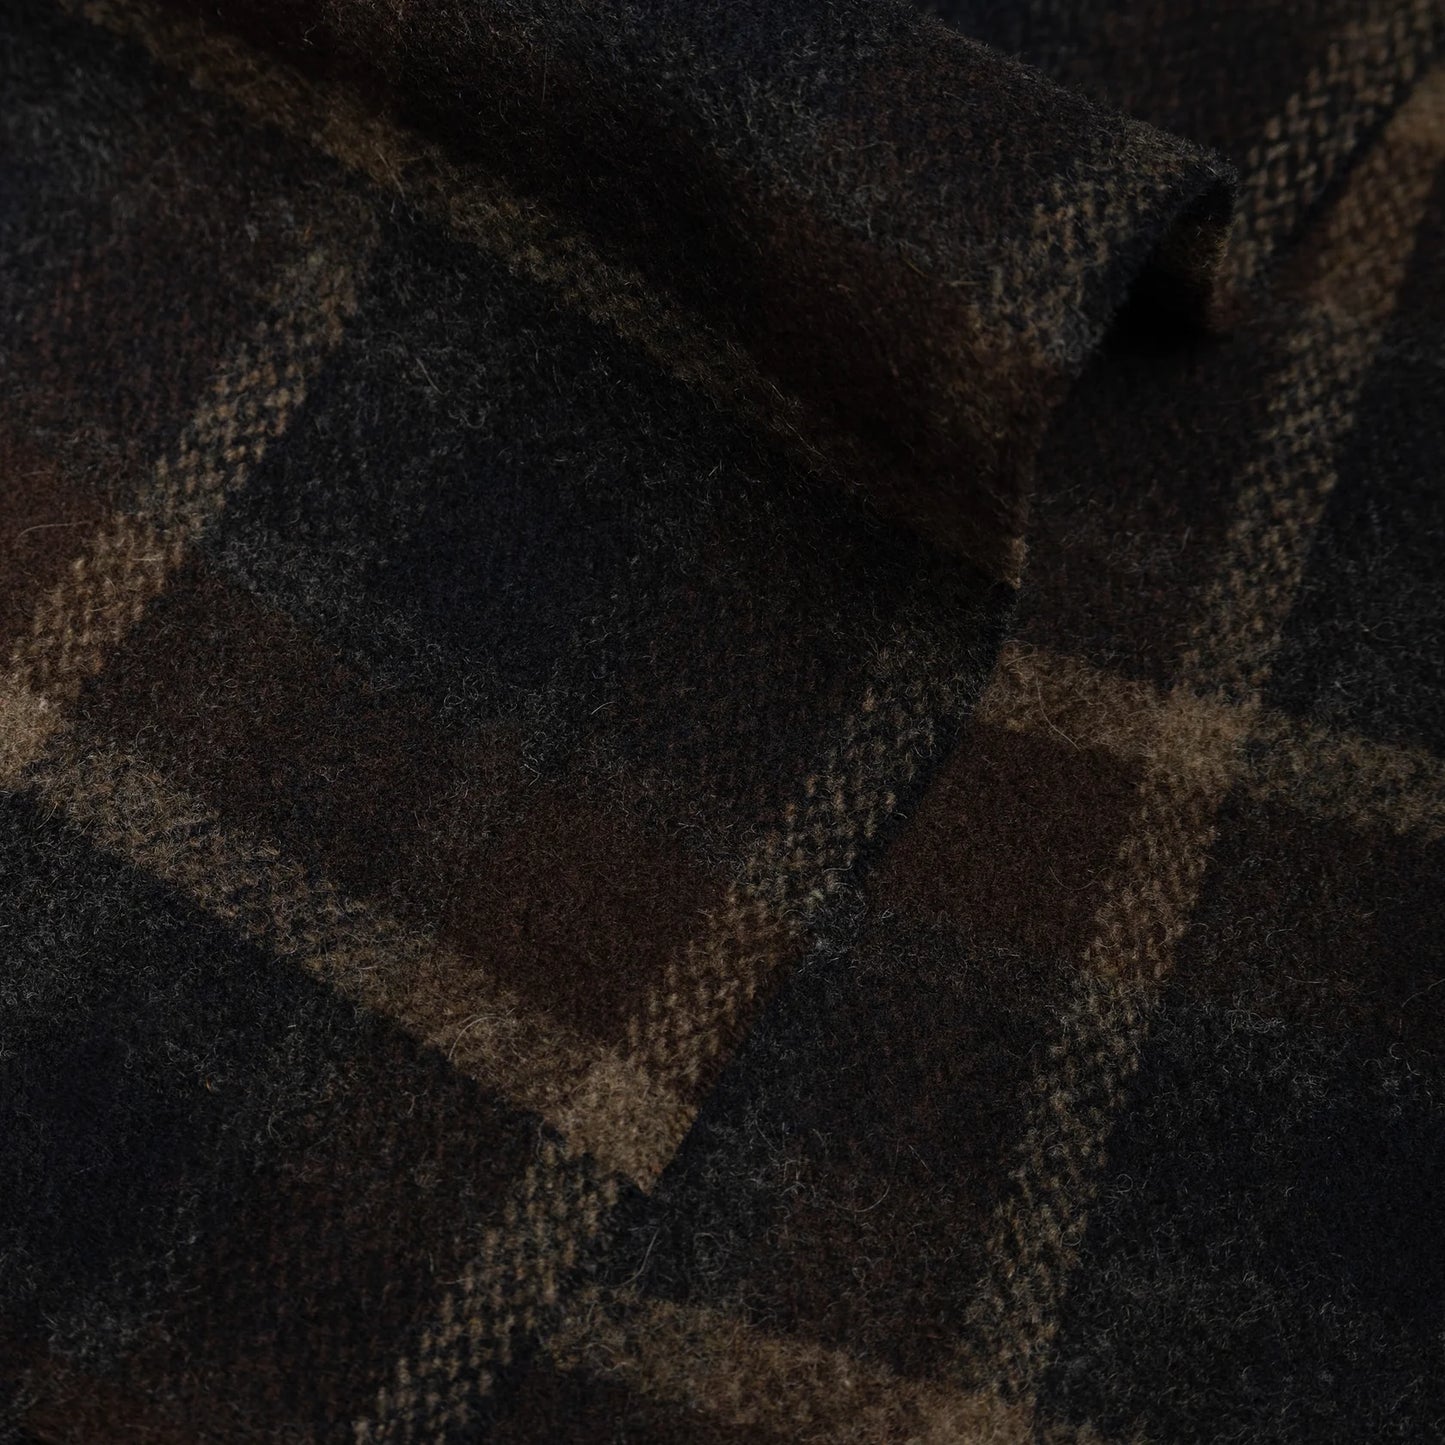 Milo & Dexter Heritage Simple Scarf in Plaid 4 Fall 23/24